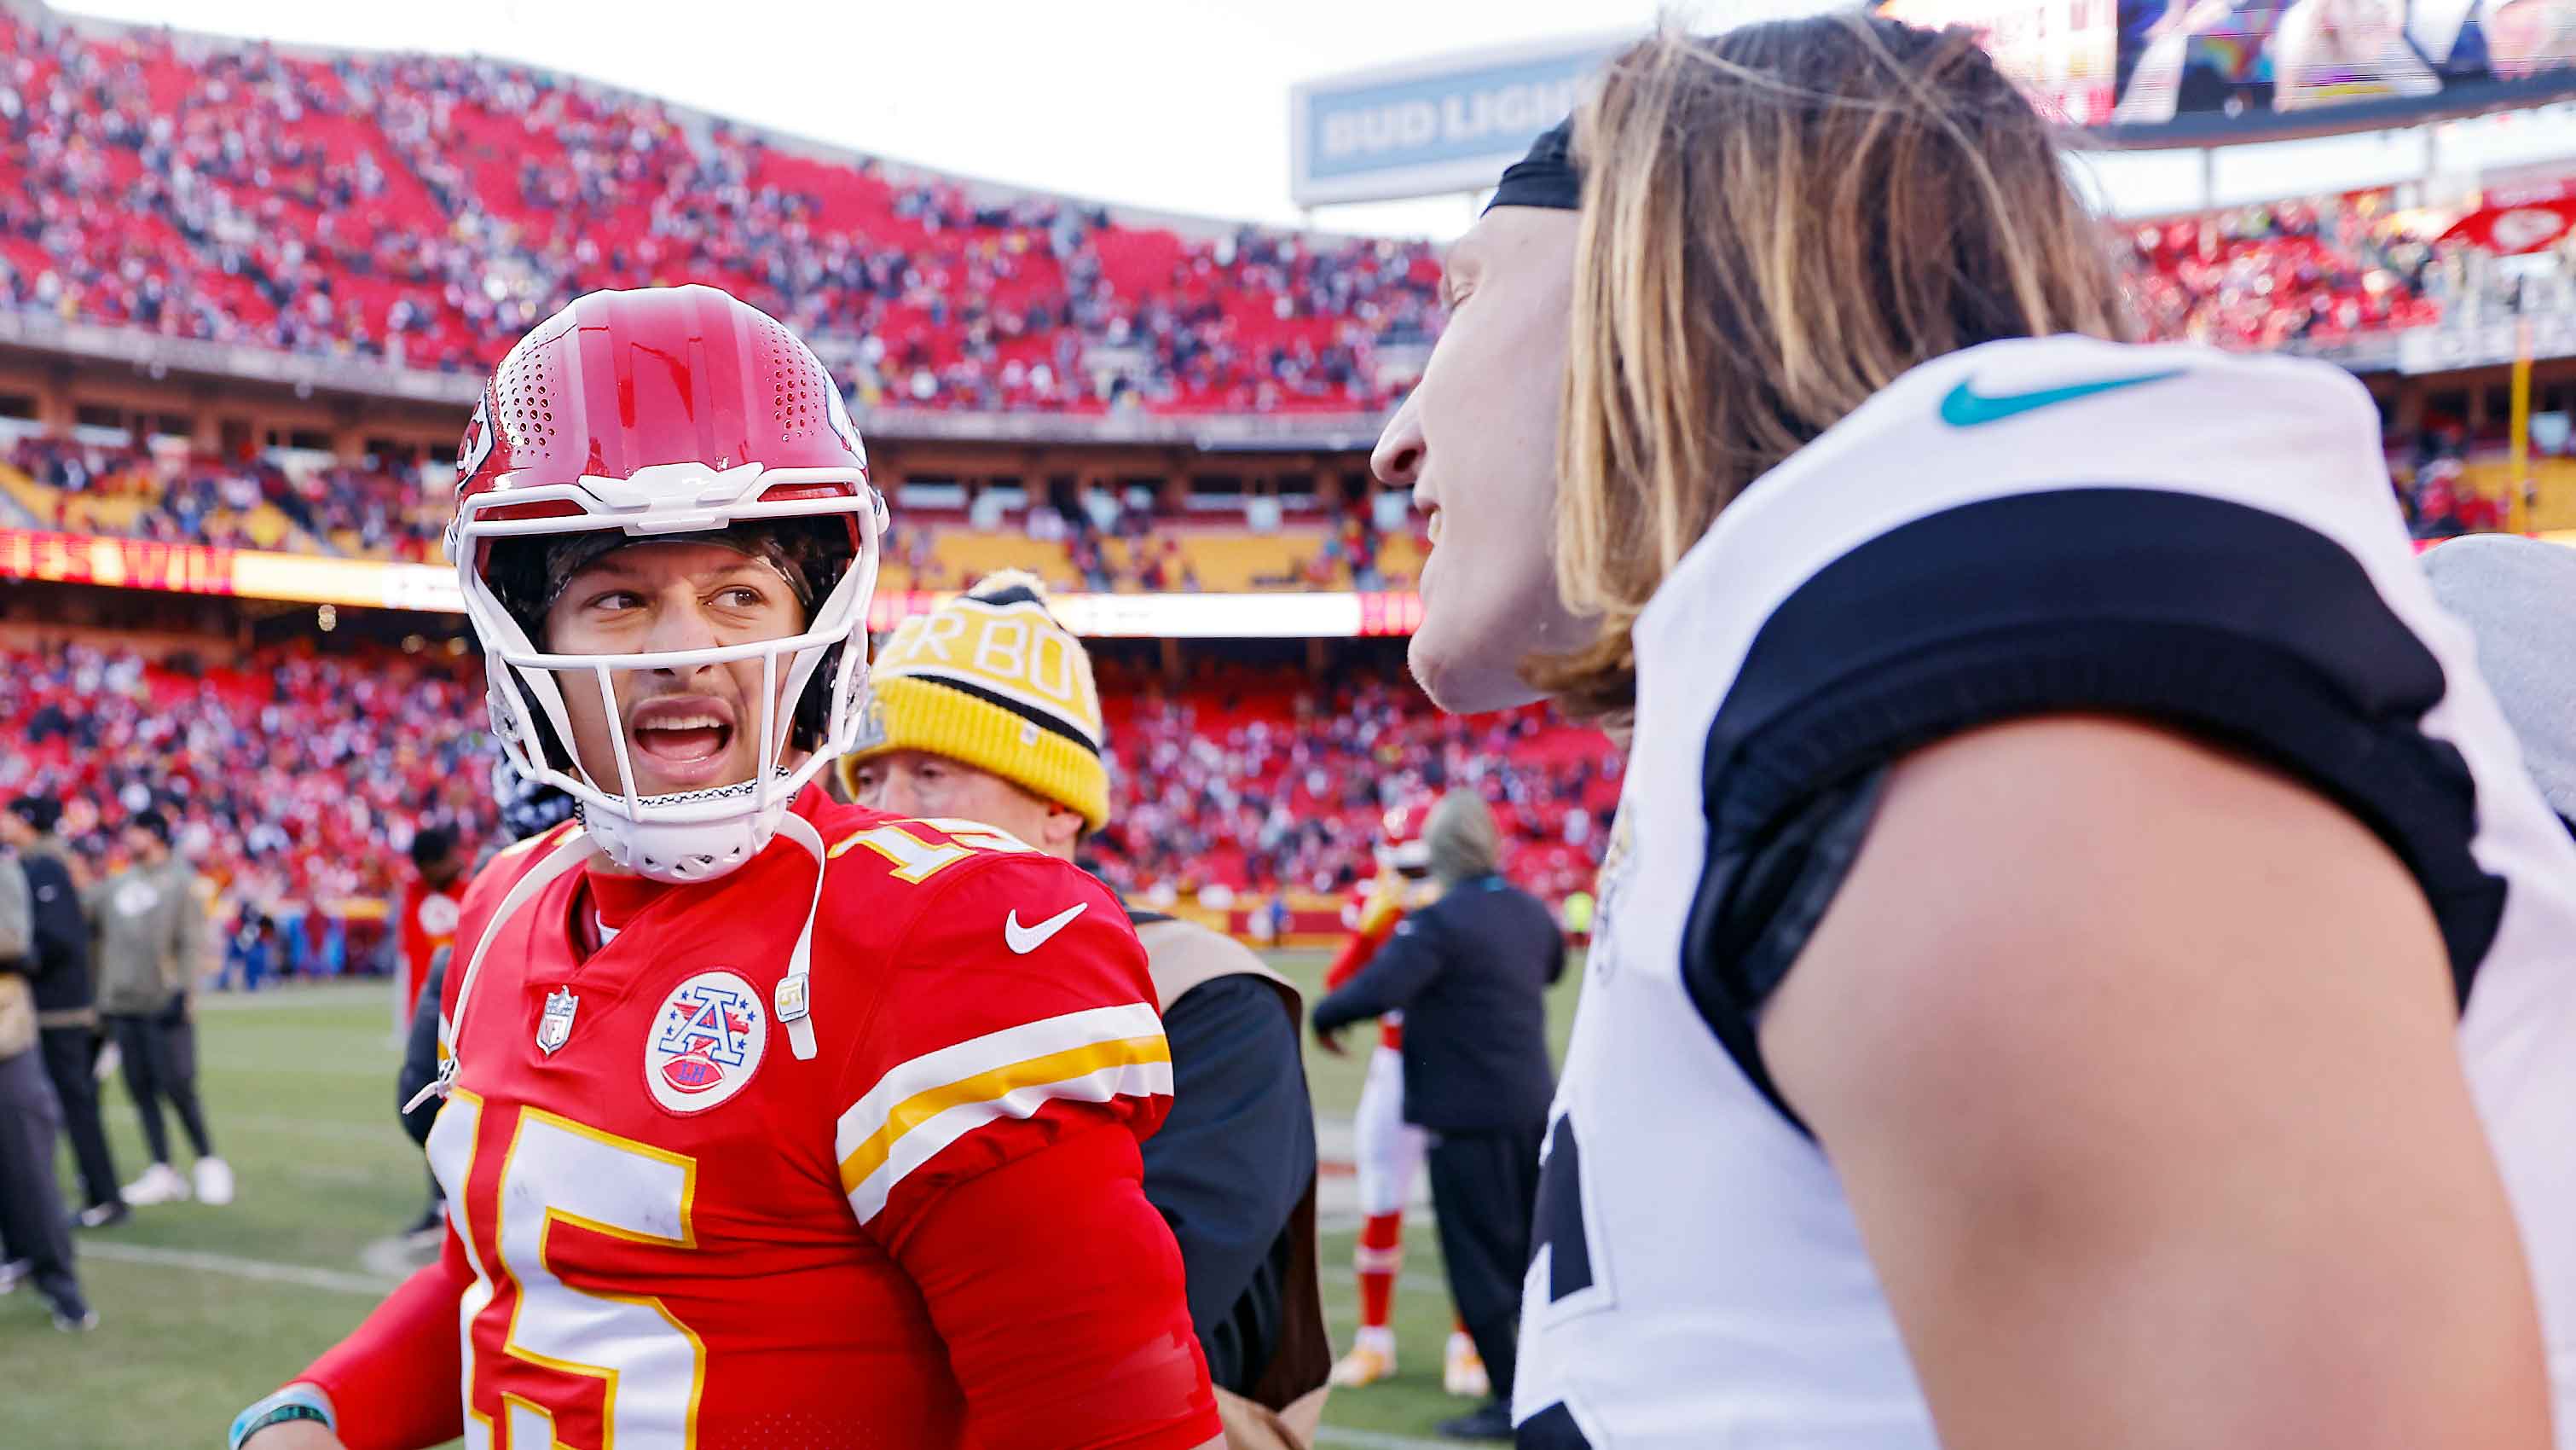 Jaguars vs Chiefs live stream: how to watch the NFL playoff game online